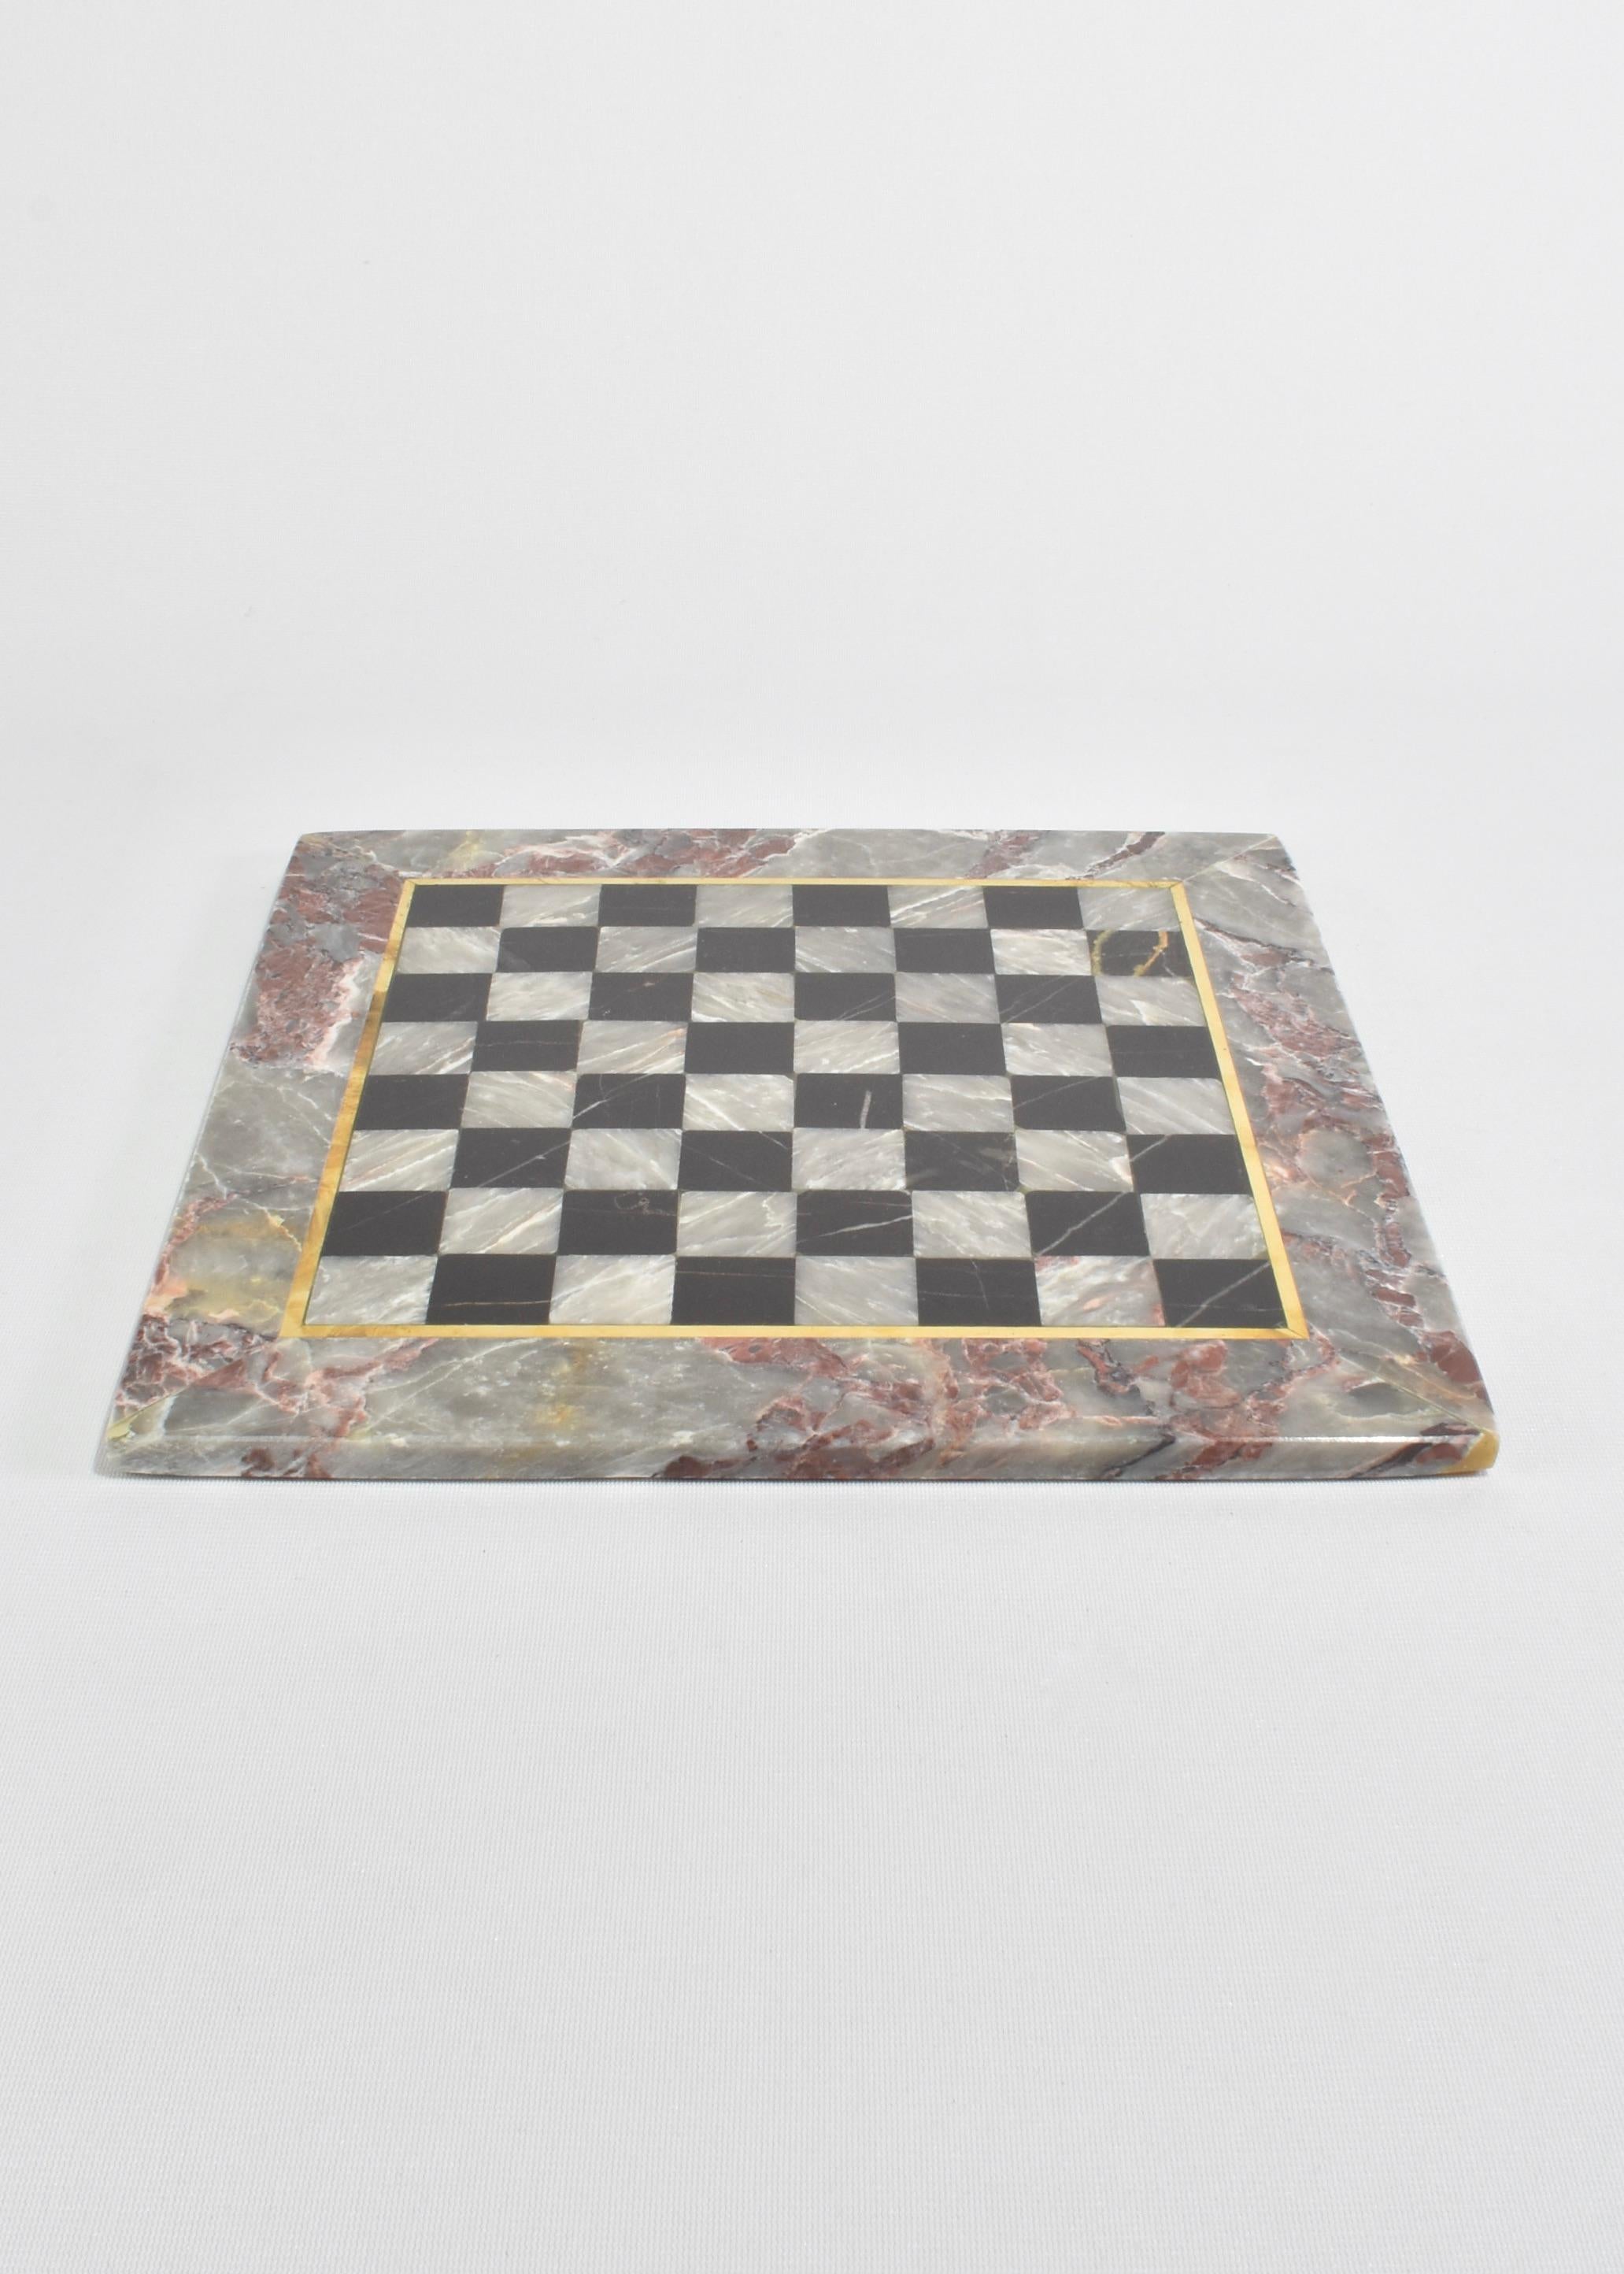 Beautiful vintage grey and black marble chess board with brass inlay and 32 chess pieces.